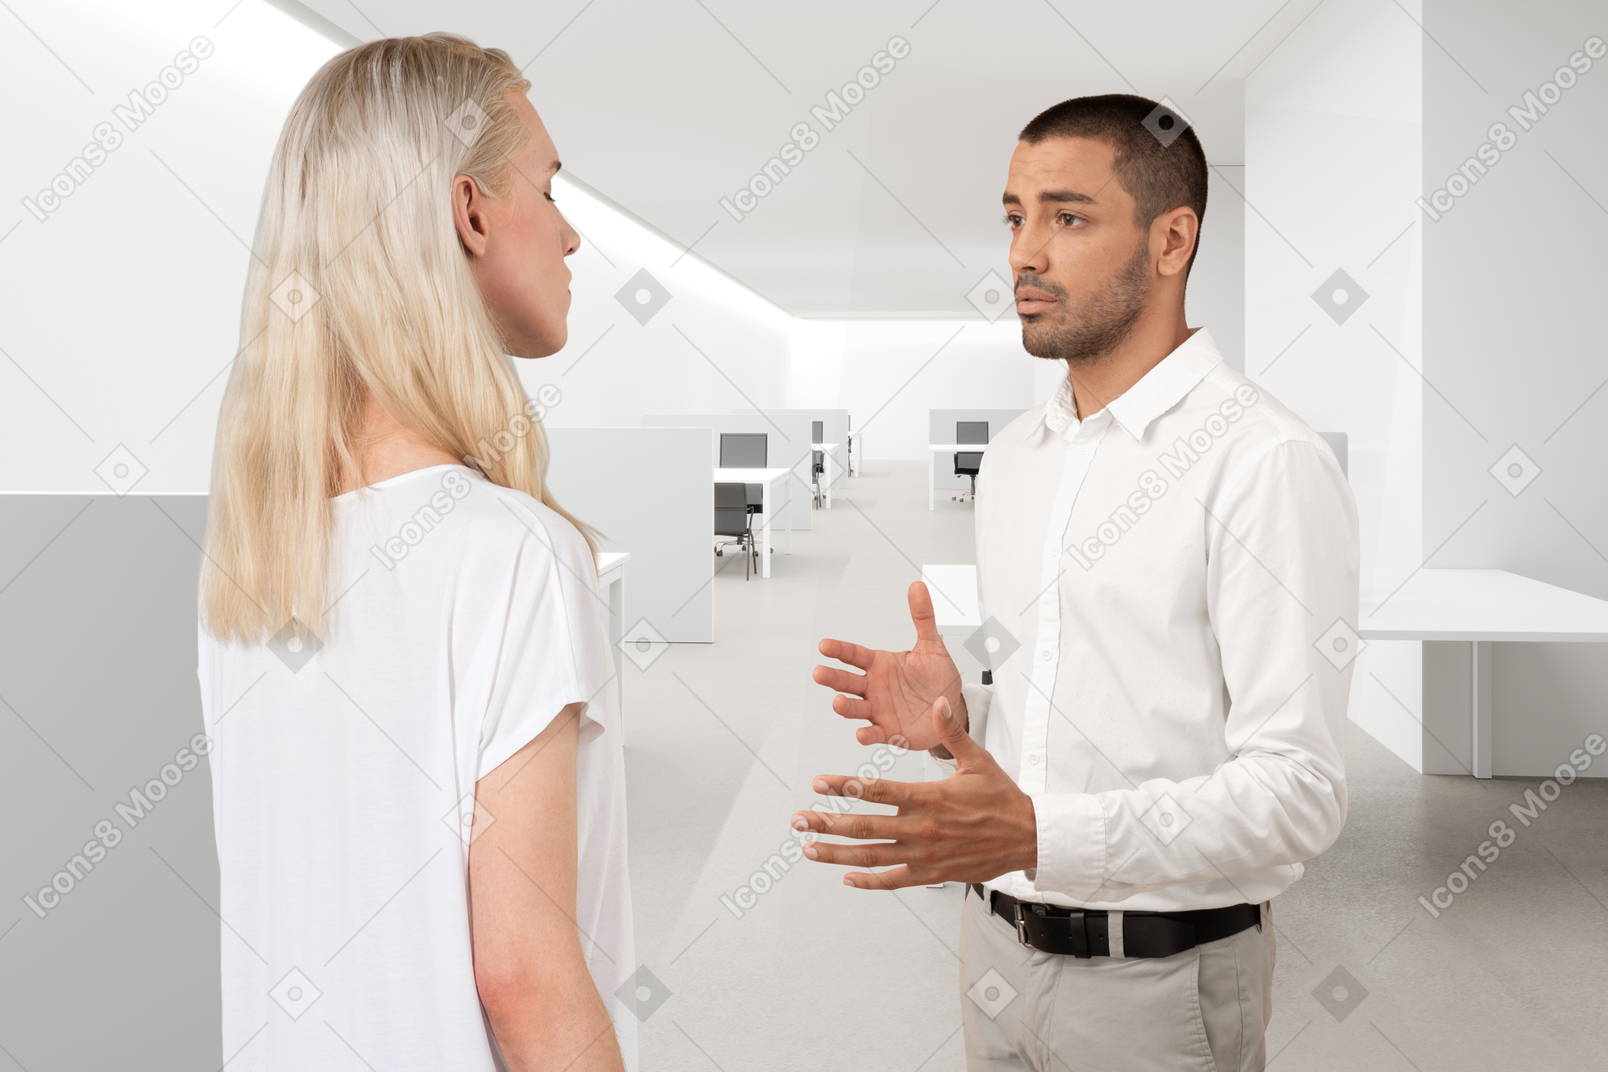 A man and woman talking in an office